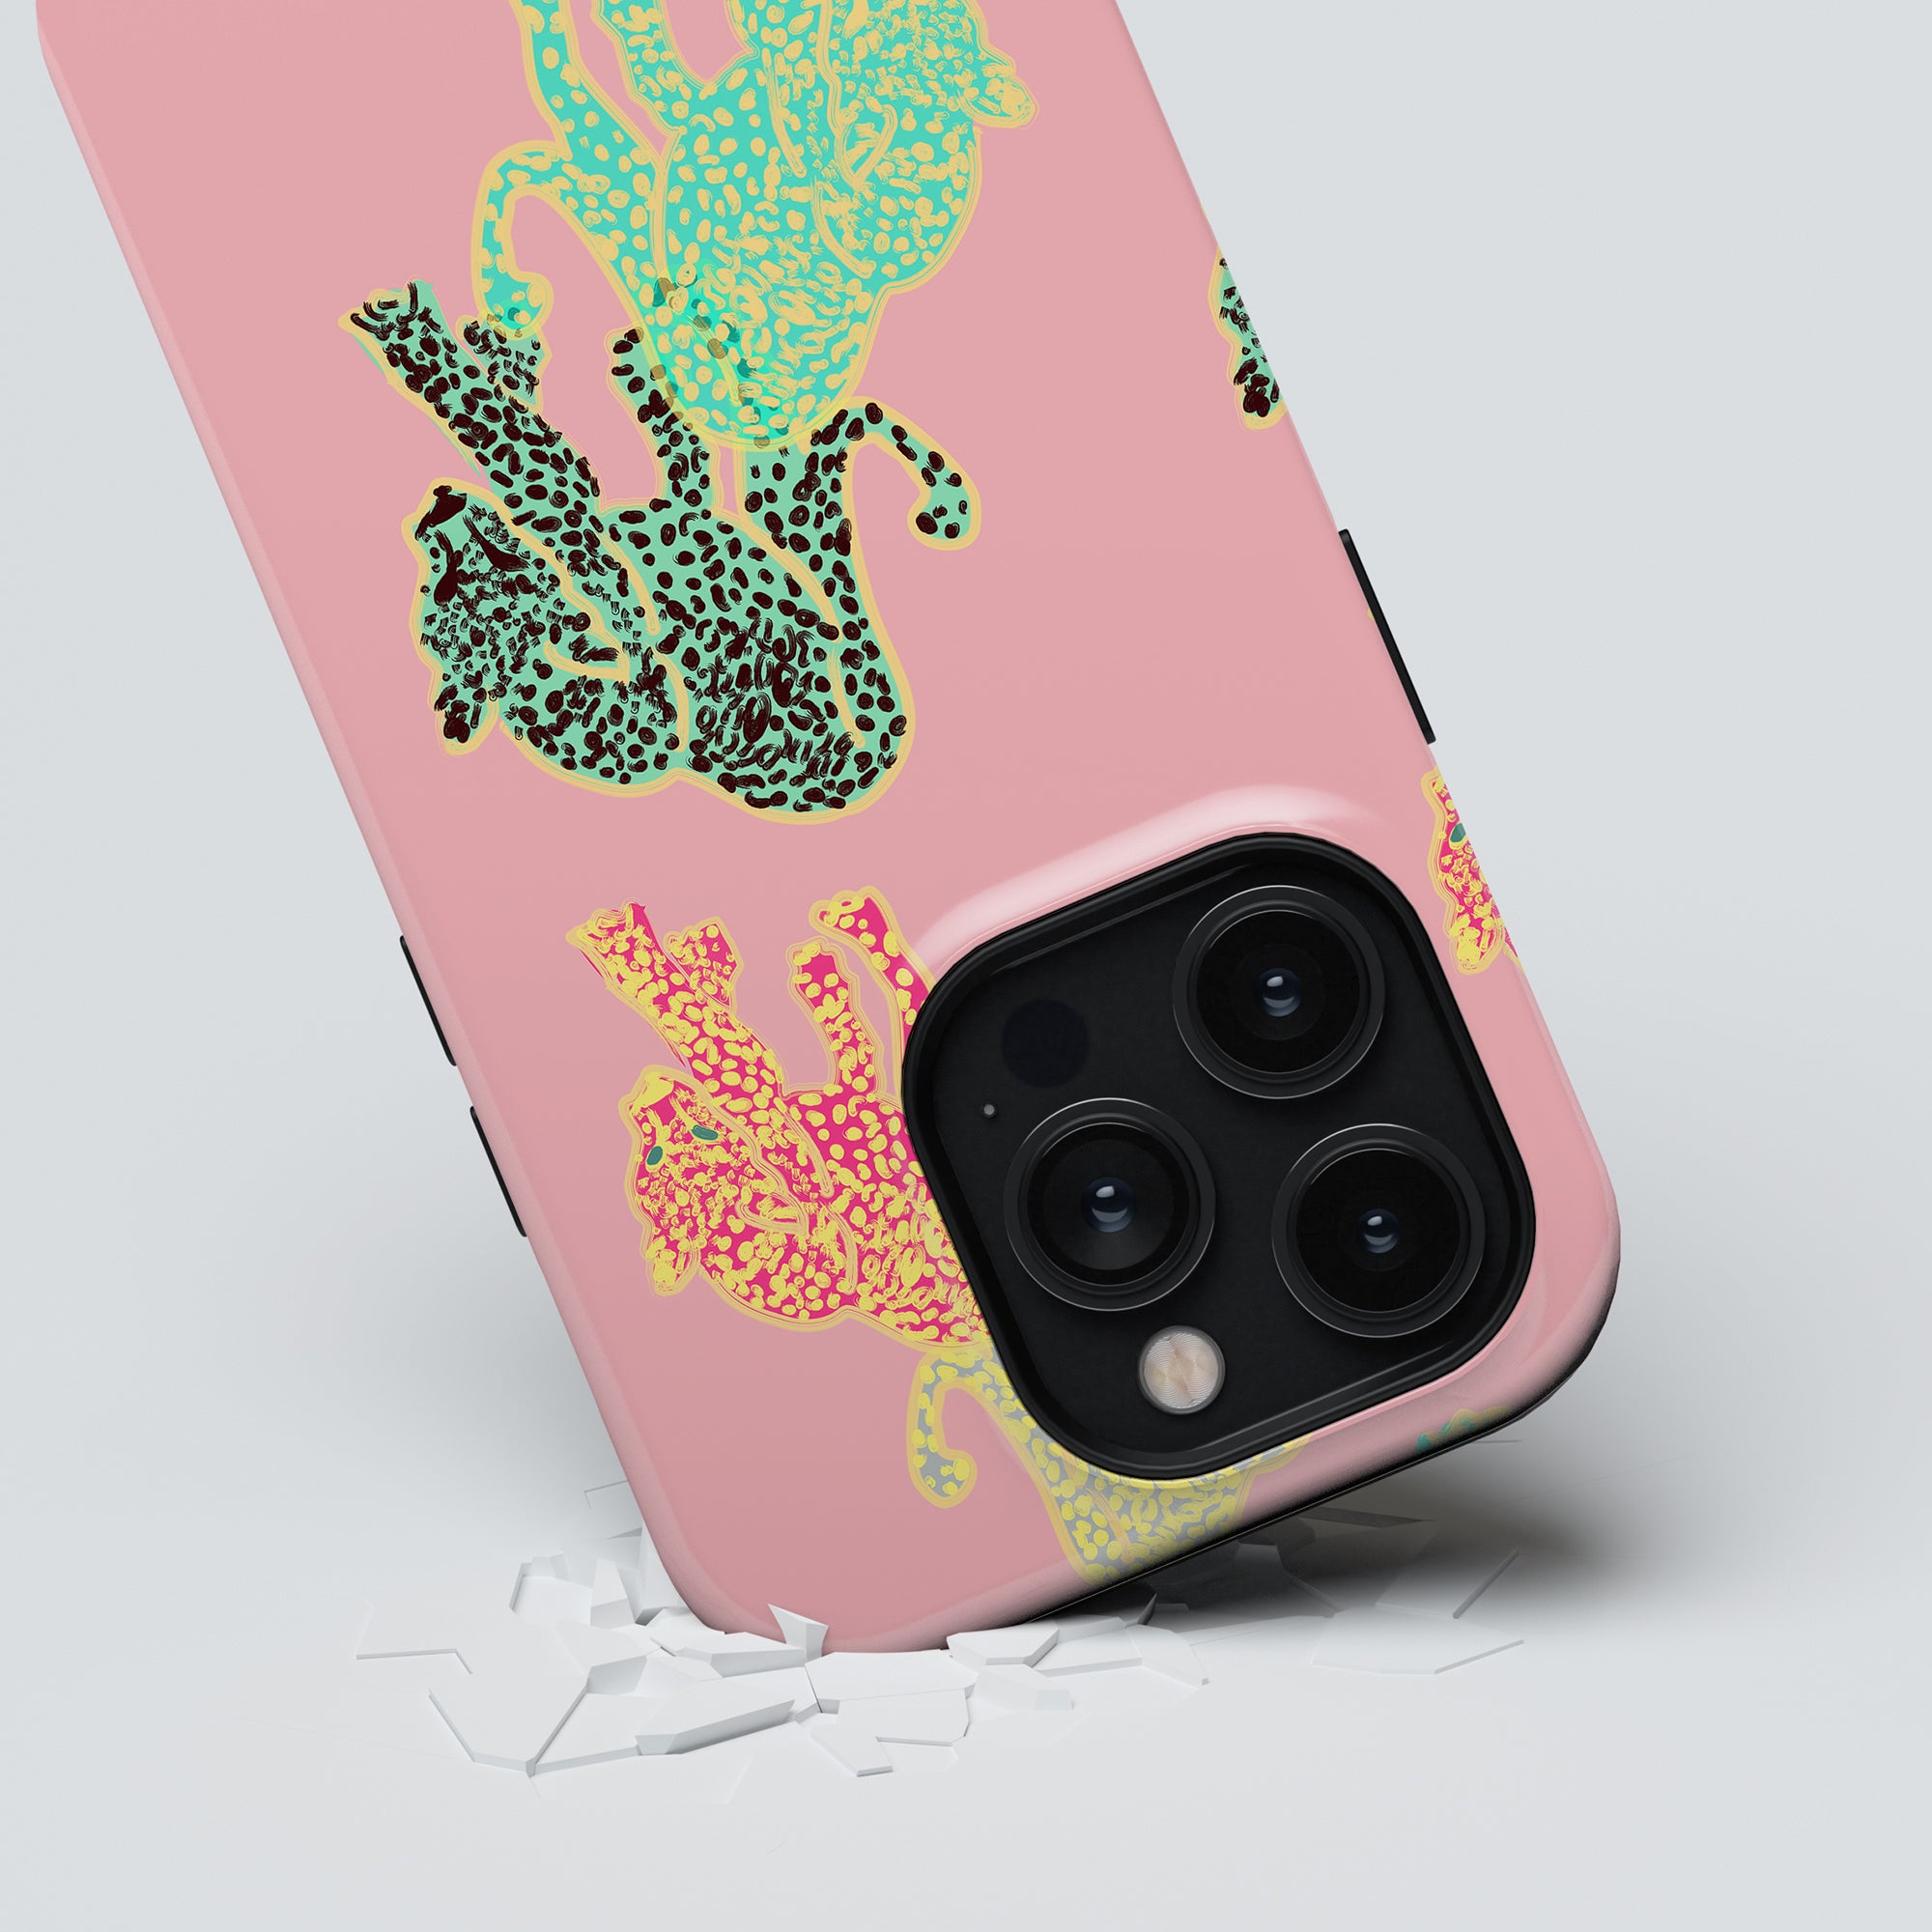 Pink smartphone with a colorful Meow - Tough Case and a triple-lens camera, falling and causing the surface to crack on impact.